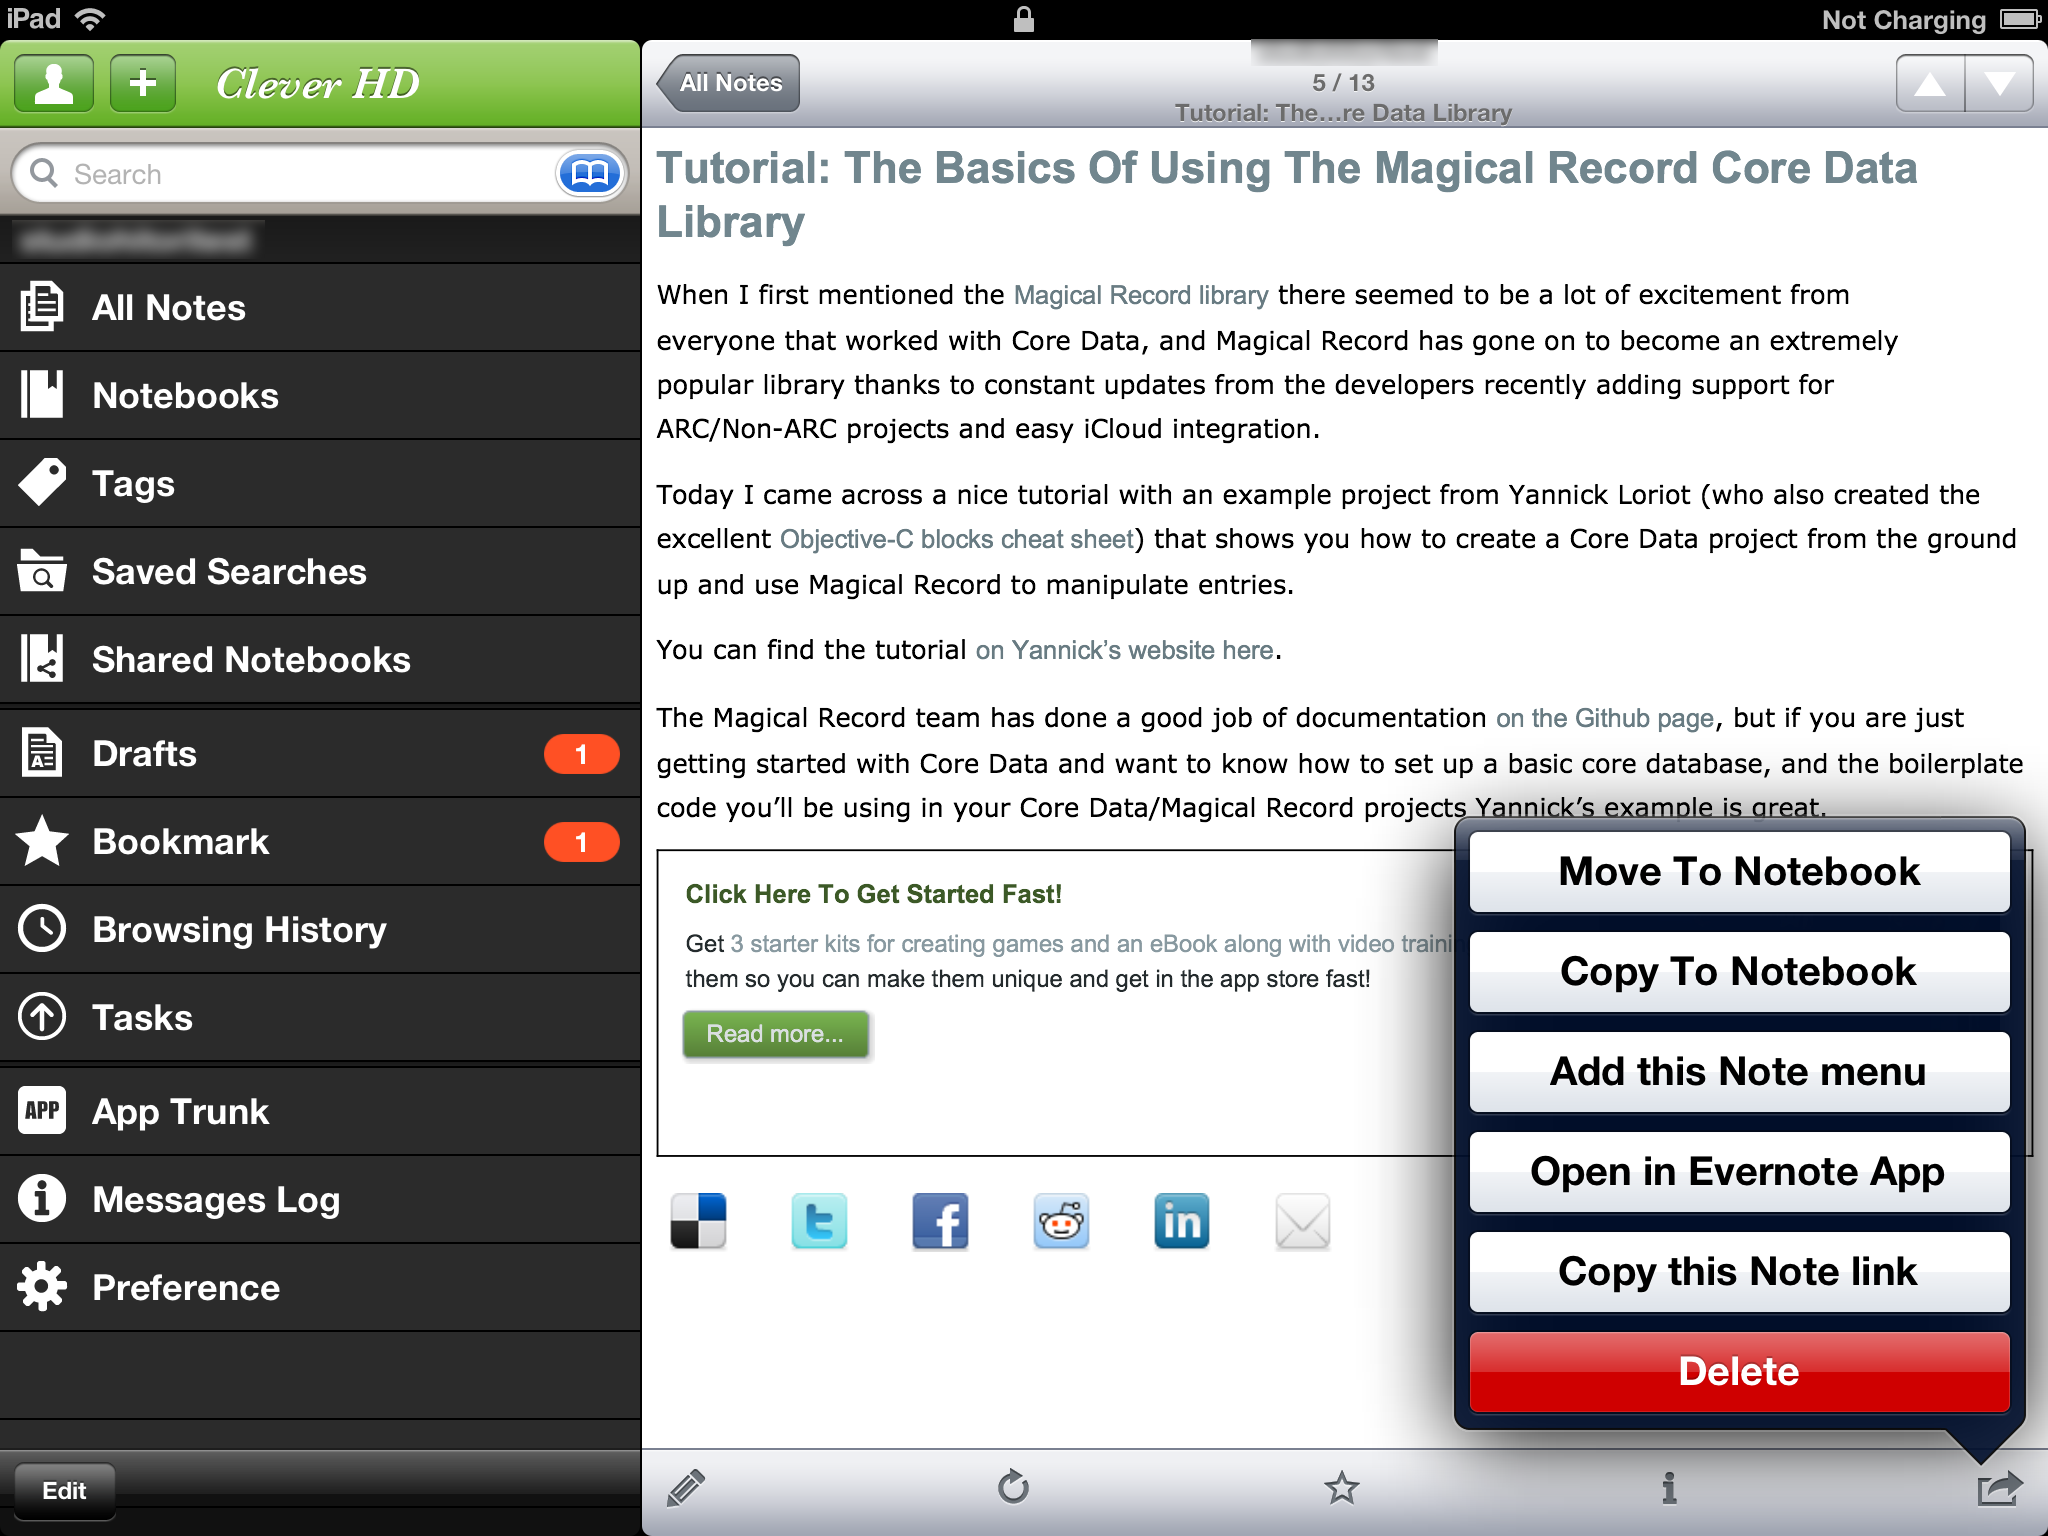 Clever - iPad - English - Evernote App Center